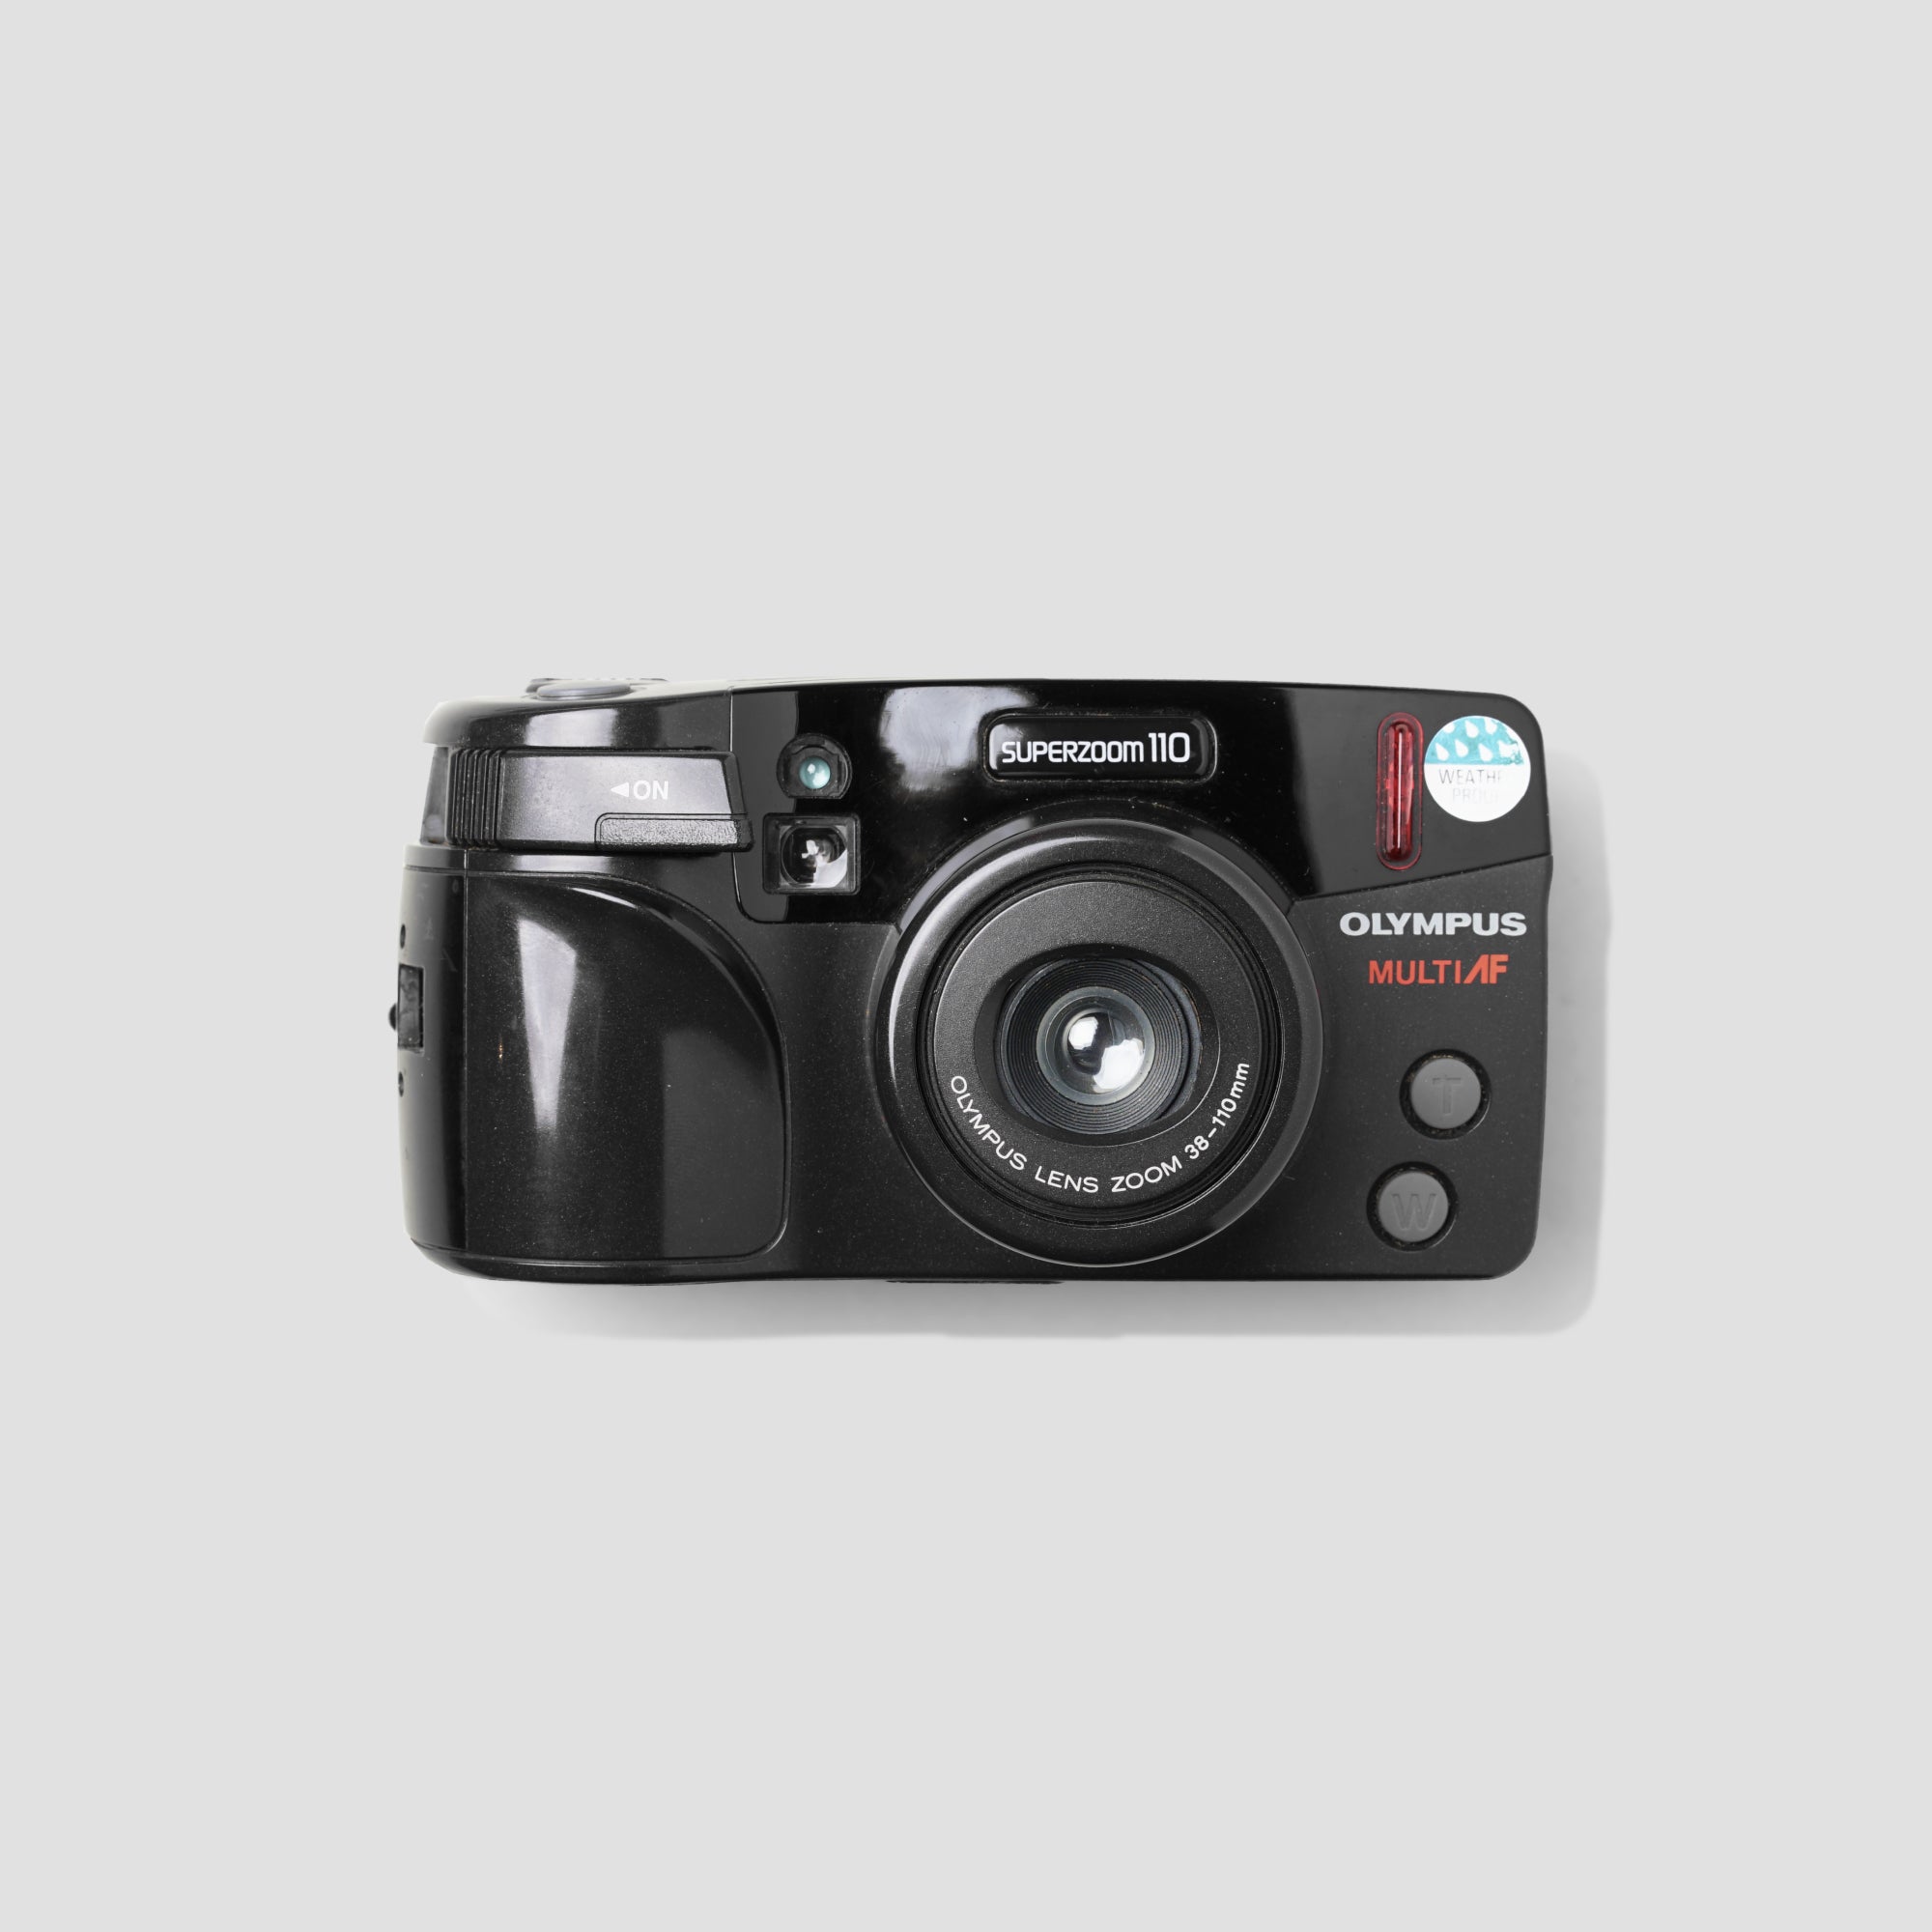 Buy Olympus Superzoom 110 now at Analogue Amsterdam